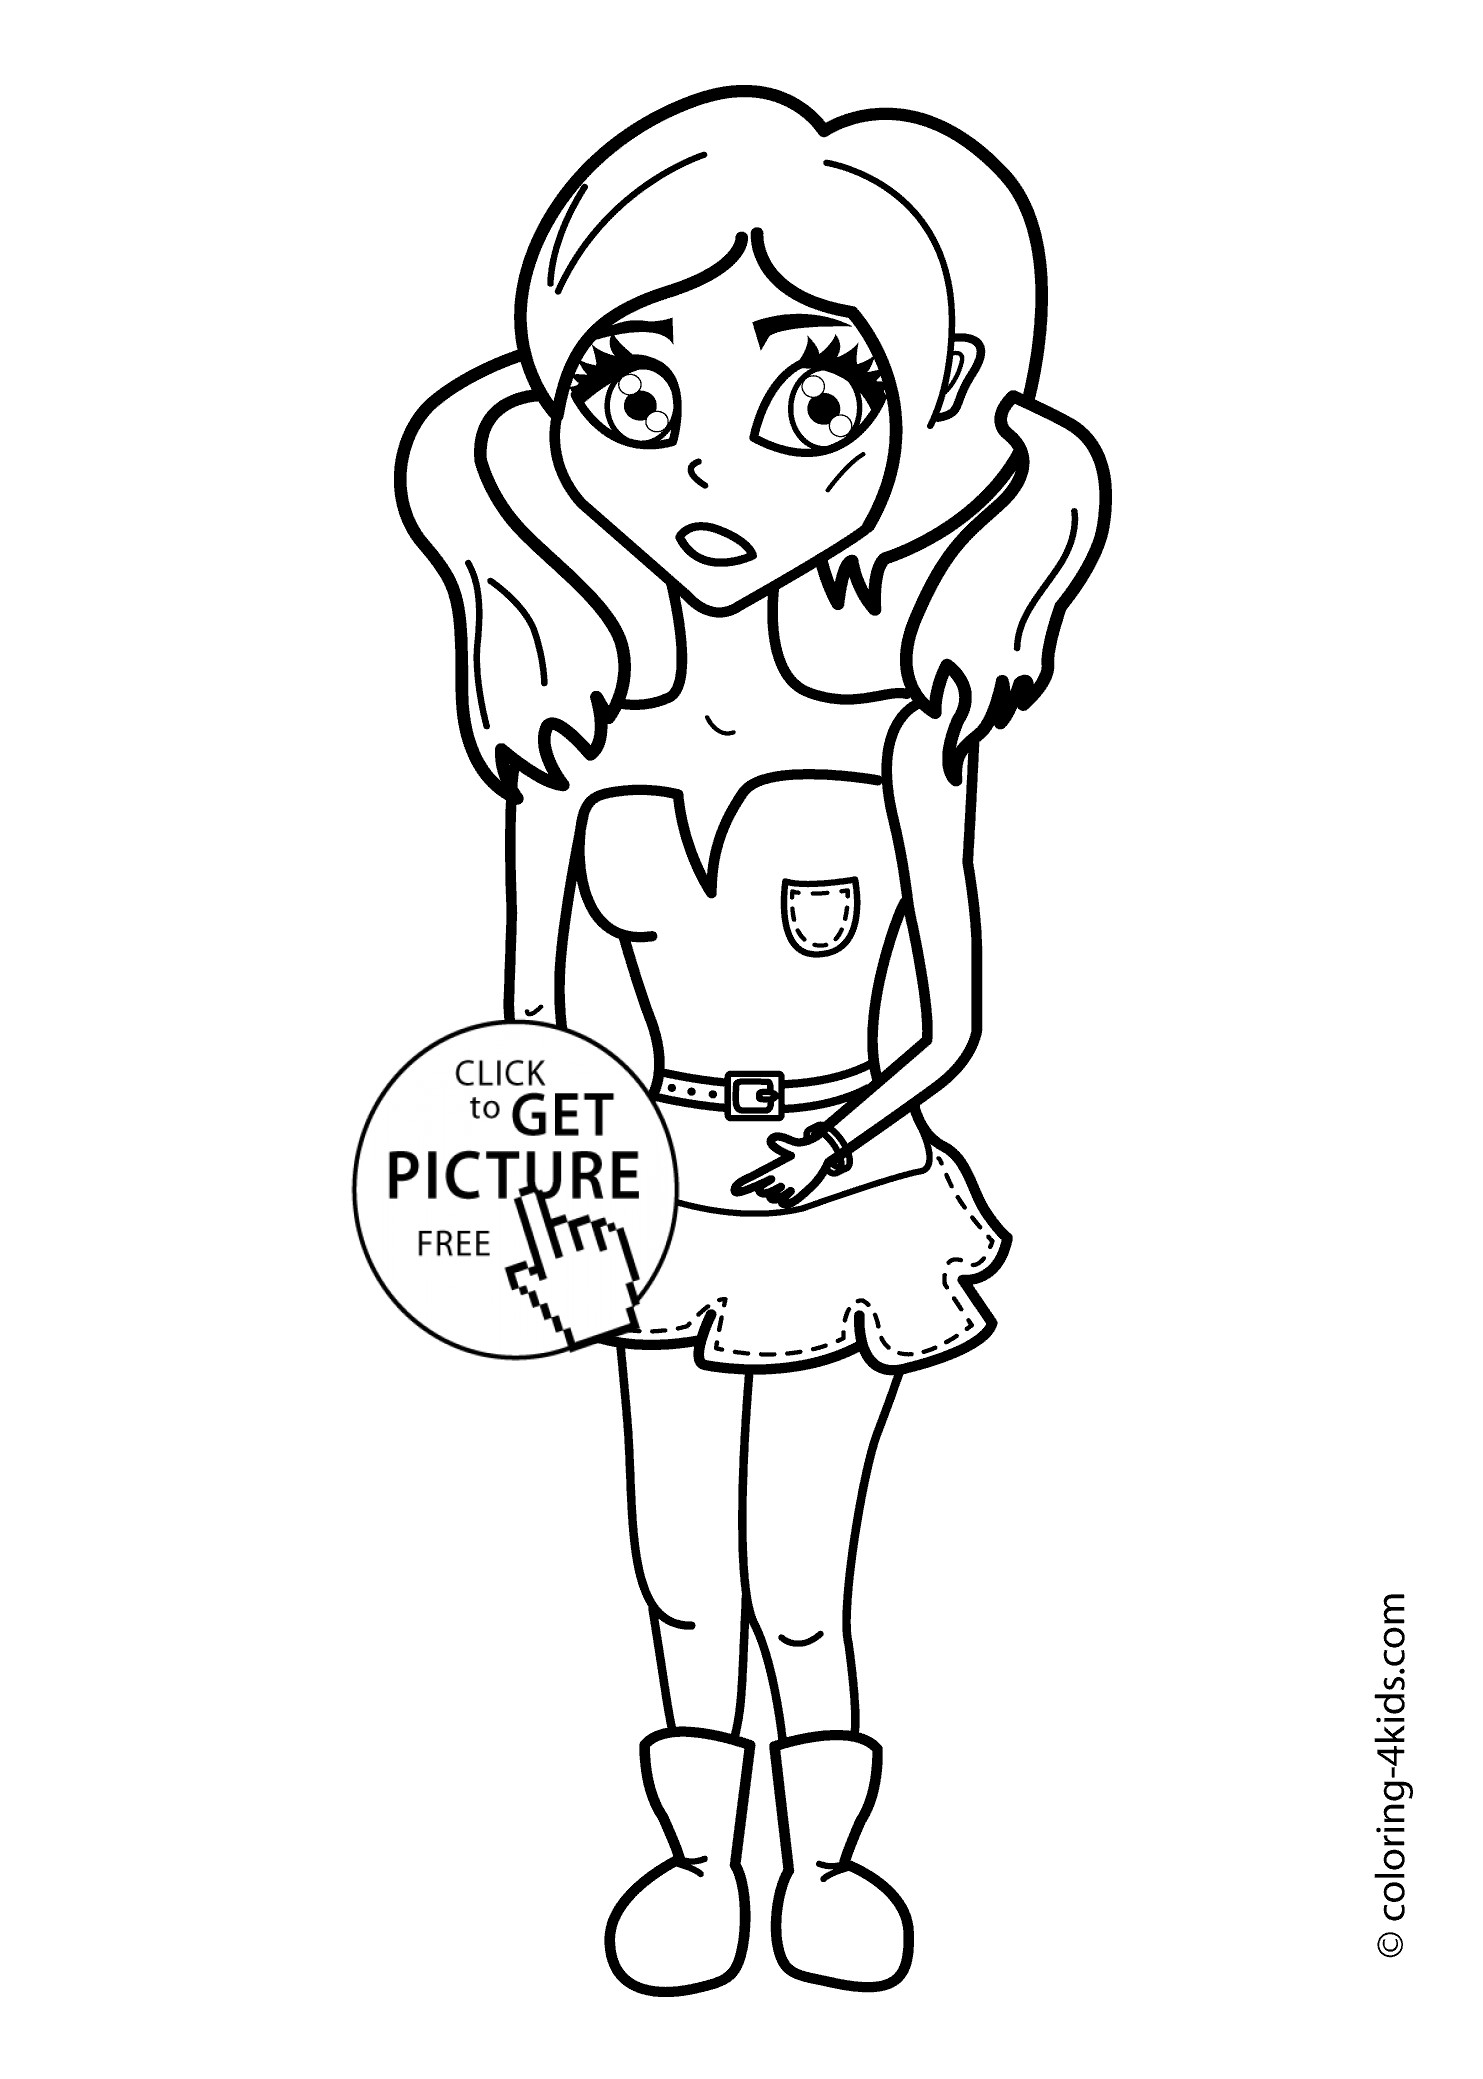 The 25 Best Ideas for Kawaii Coloring Pages for Girls - Home, Family